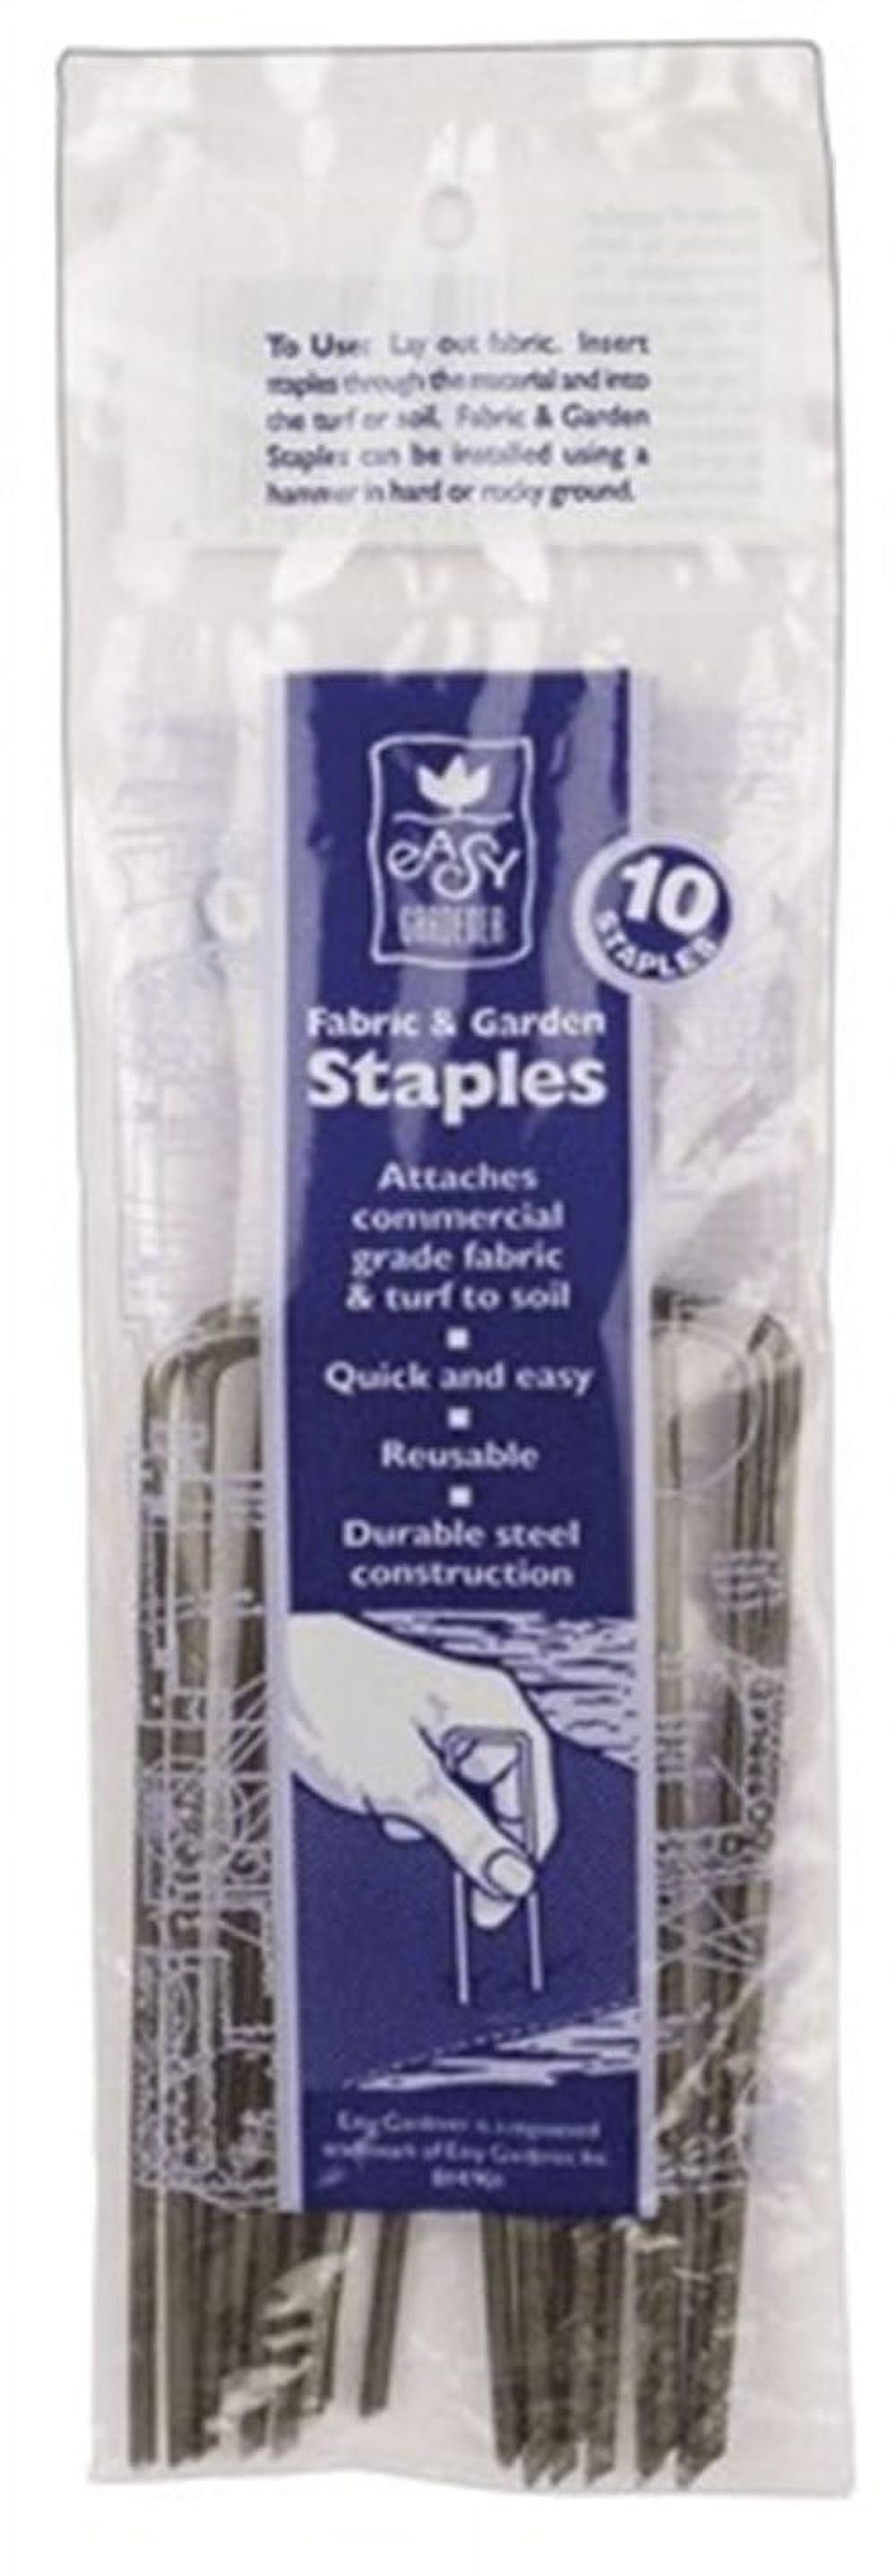 Easy Gardener 814 016069003937 Fabric & Garden Staples Attaches Landscape Fabric and Turf to Soil (4, 10 - image 3 of 3